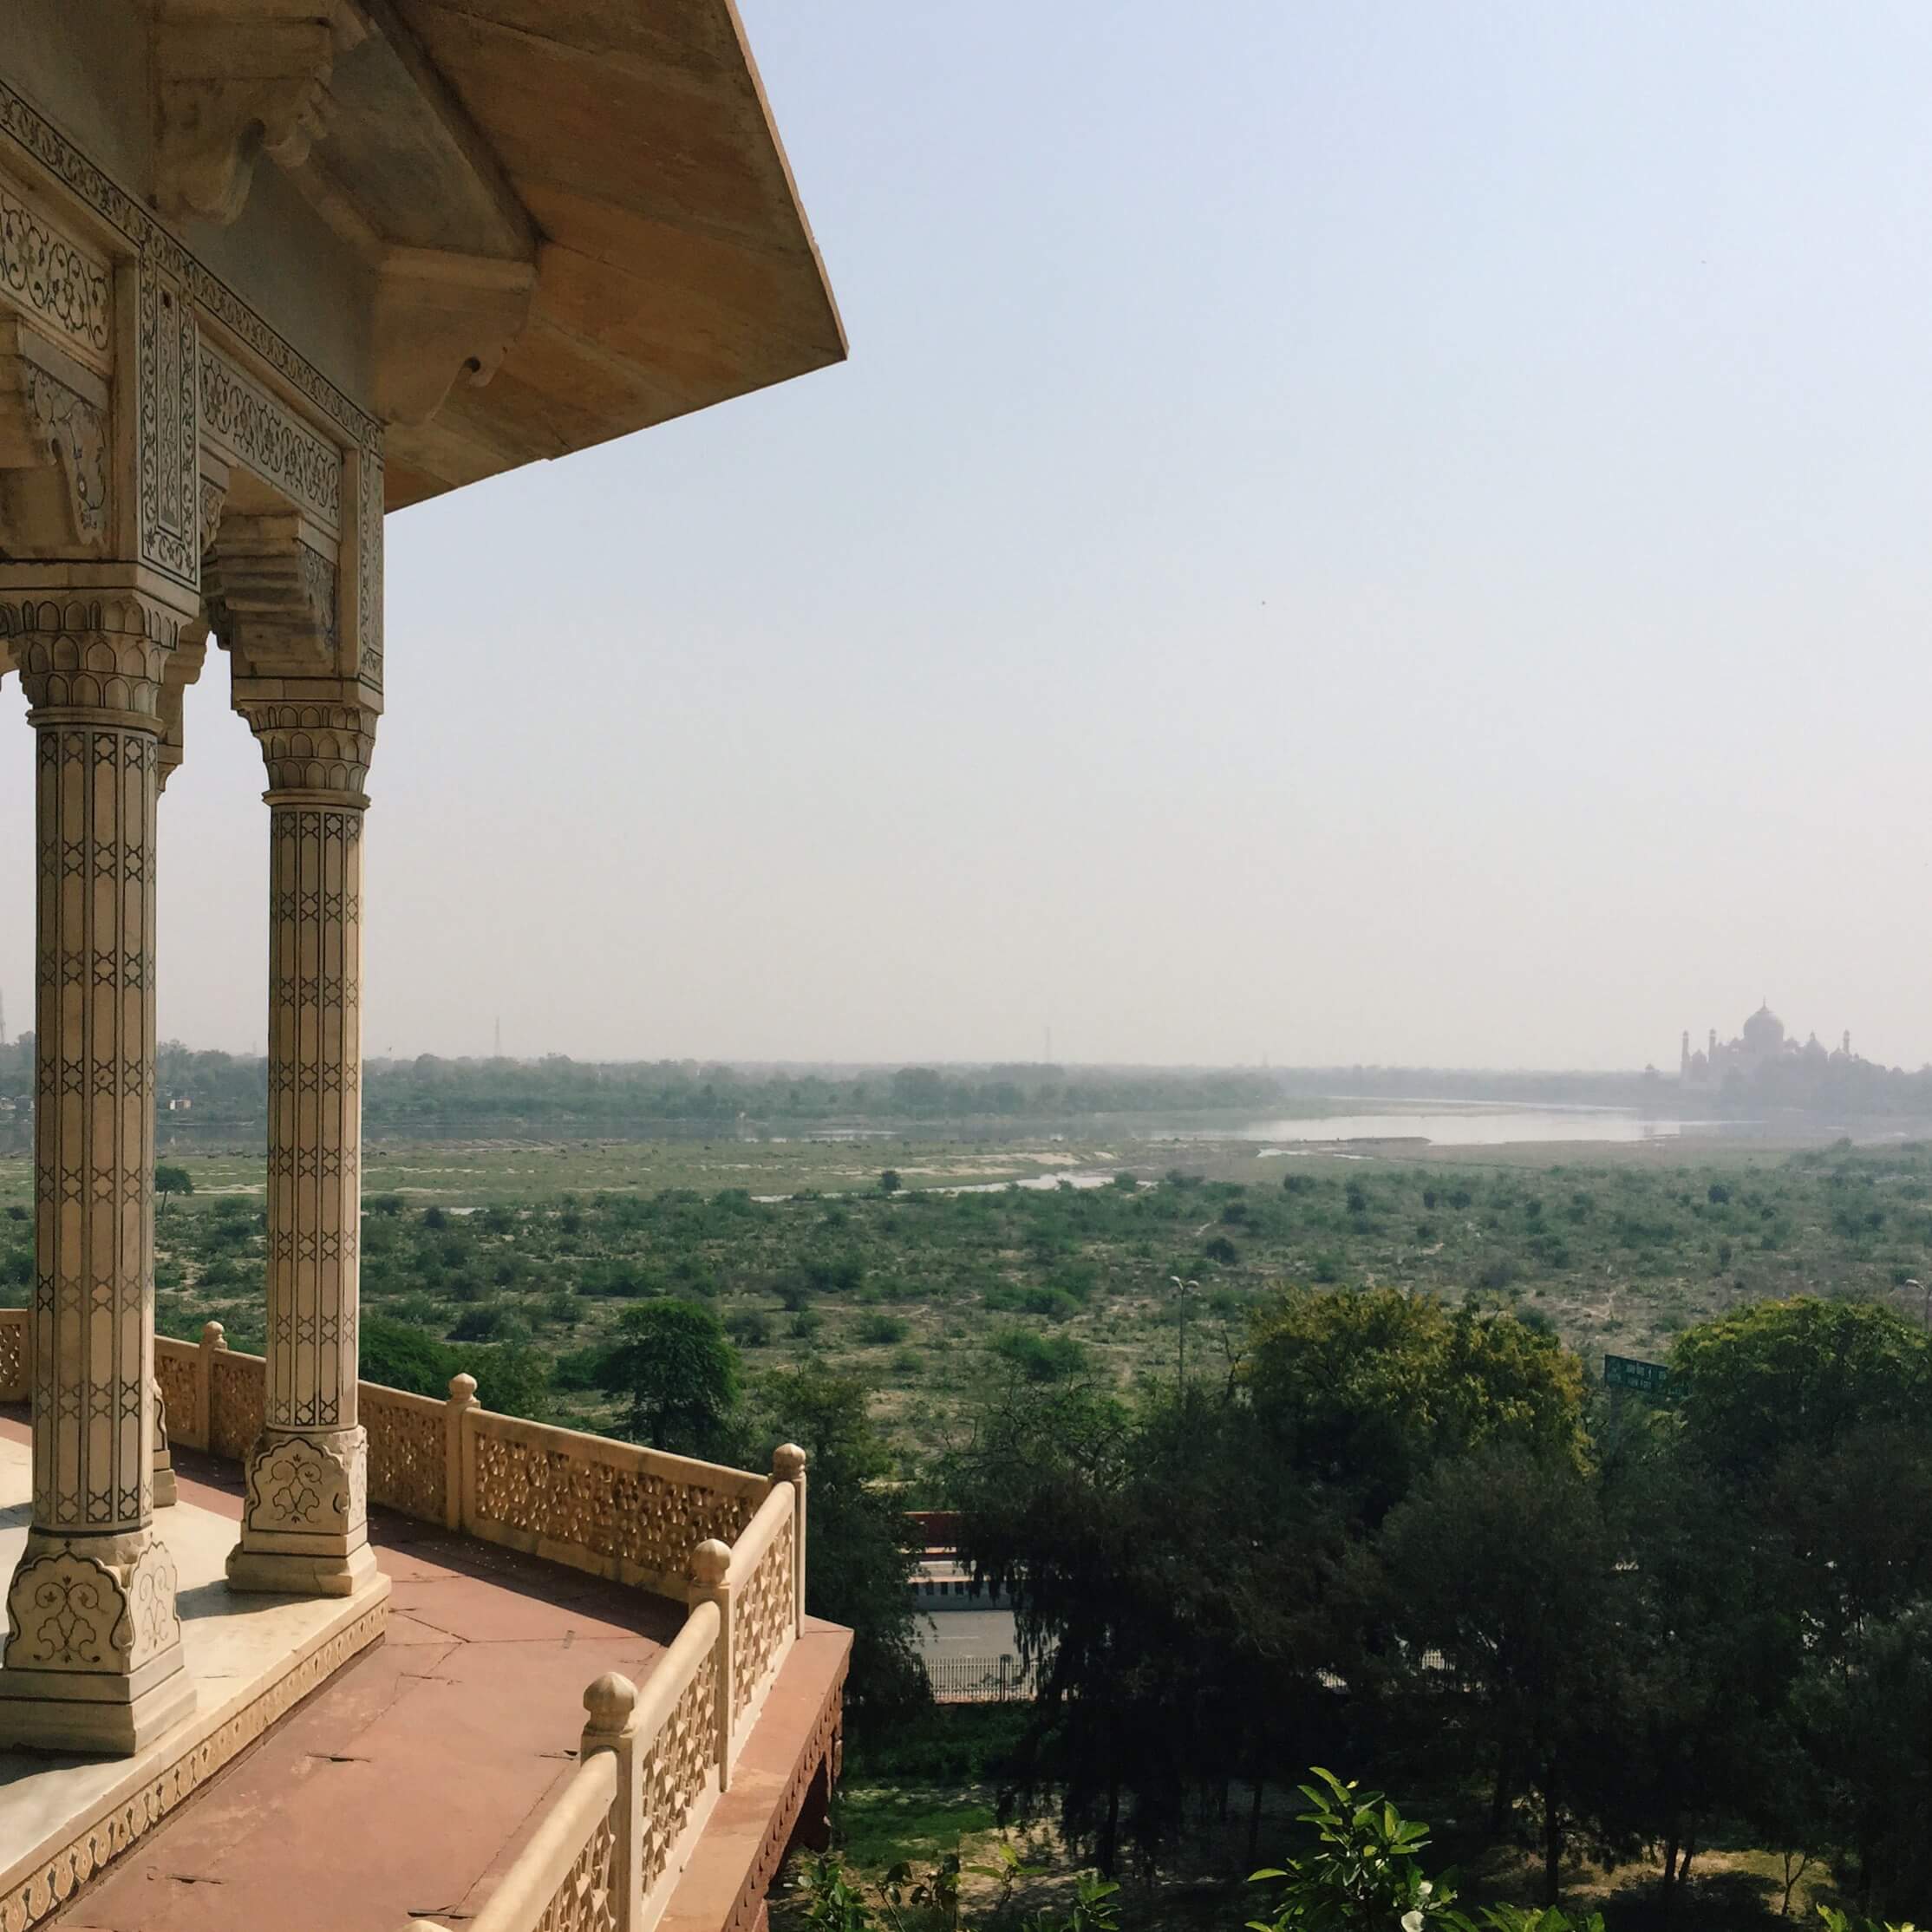 The first time I saw the Taj Mahal was from this balcony in the Agra fort. In this marble tower (Musaman Burj), the emperor Shah Jahan would stare out at the monument he had built for his wife Mumtaaz. The love for his wife was juxtaposed against the jealousy and desire for power of his son, who had Shah Jahan imprisoned here until his death. I remembered all the Arabian love and folklore stories with which I grew up, and I can only imagine the significance of visiting this site for the locals who grew up with the story of the Taj Mahal.